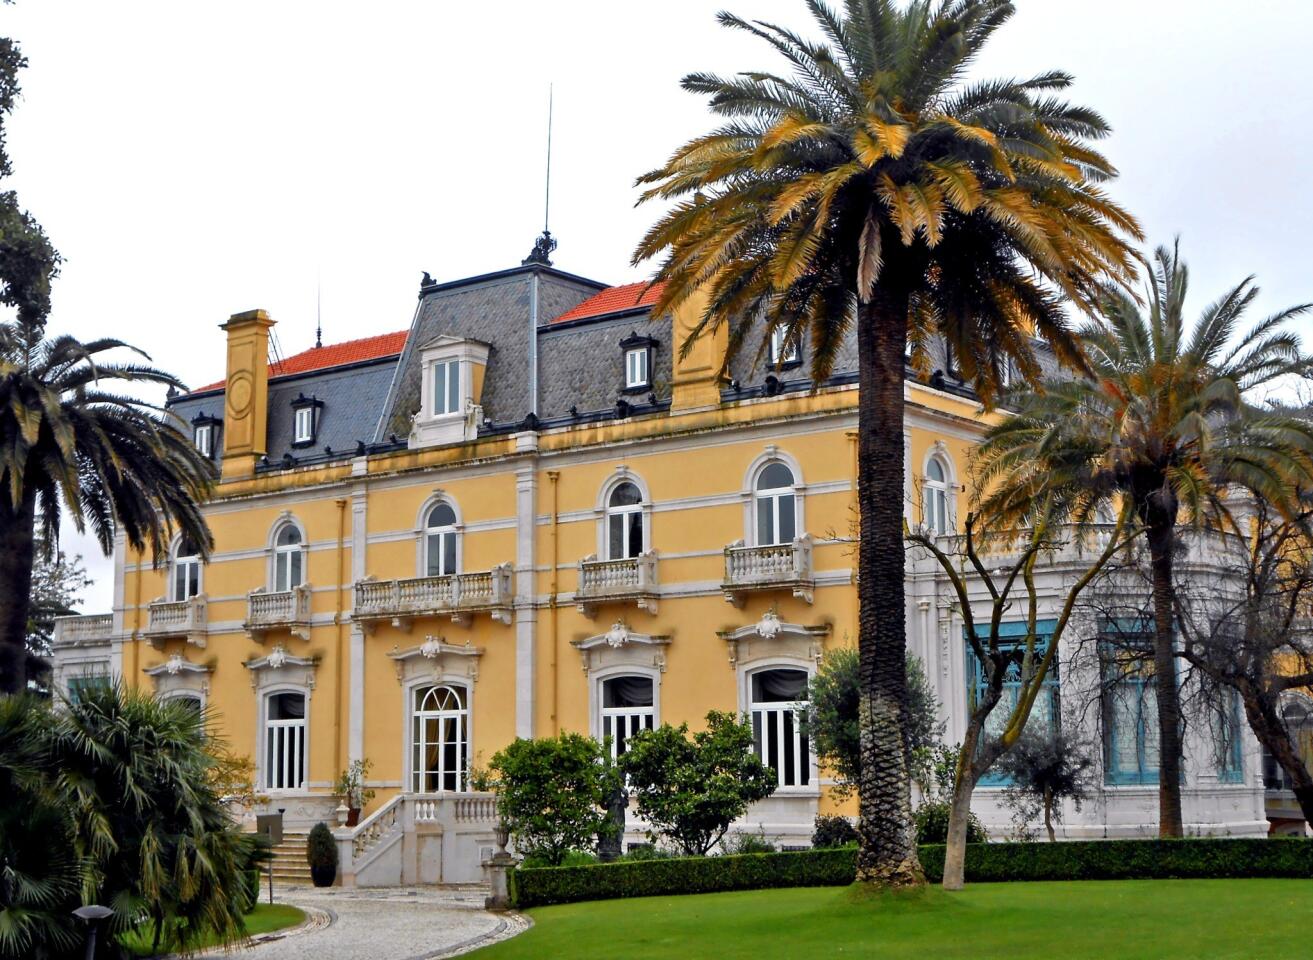 The Pestana Palace, a luxury hotel located in a residential area of Lisbon.